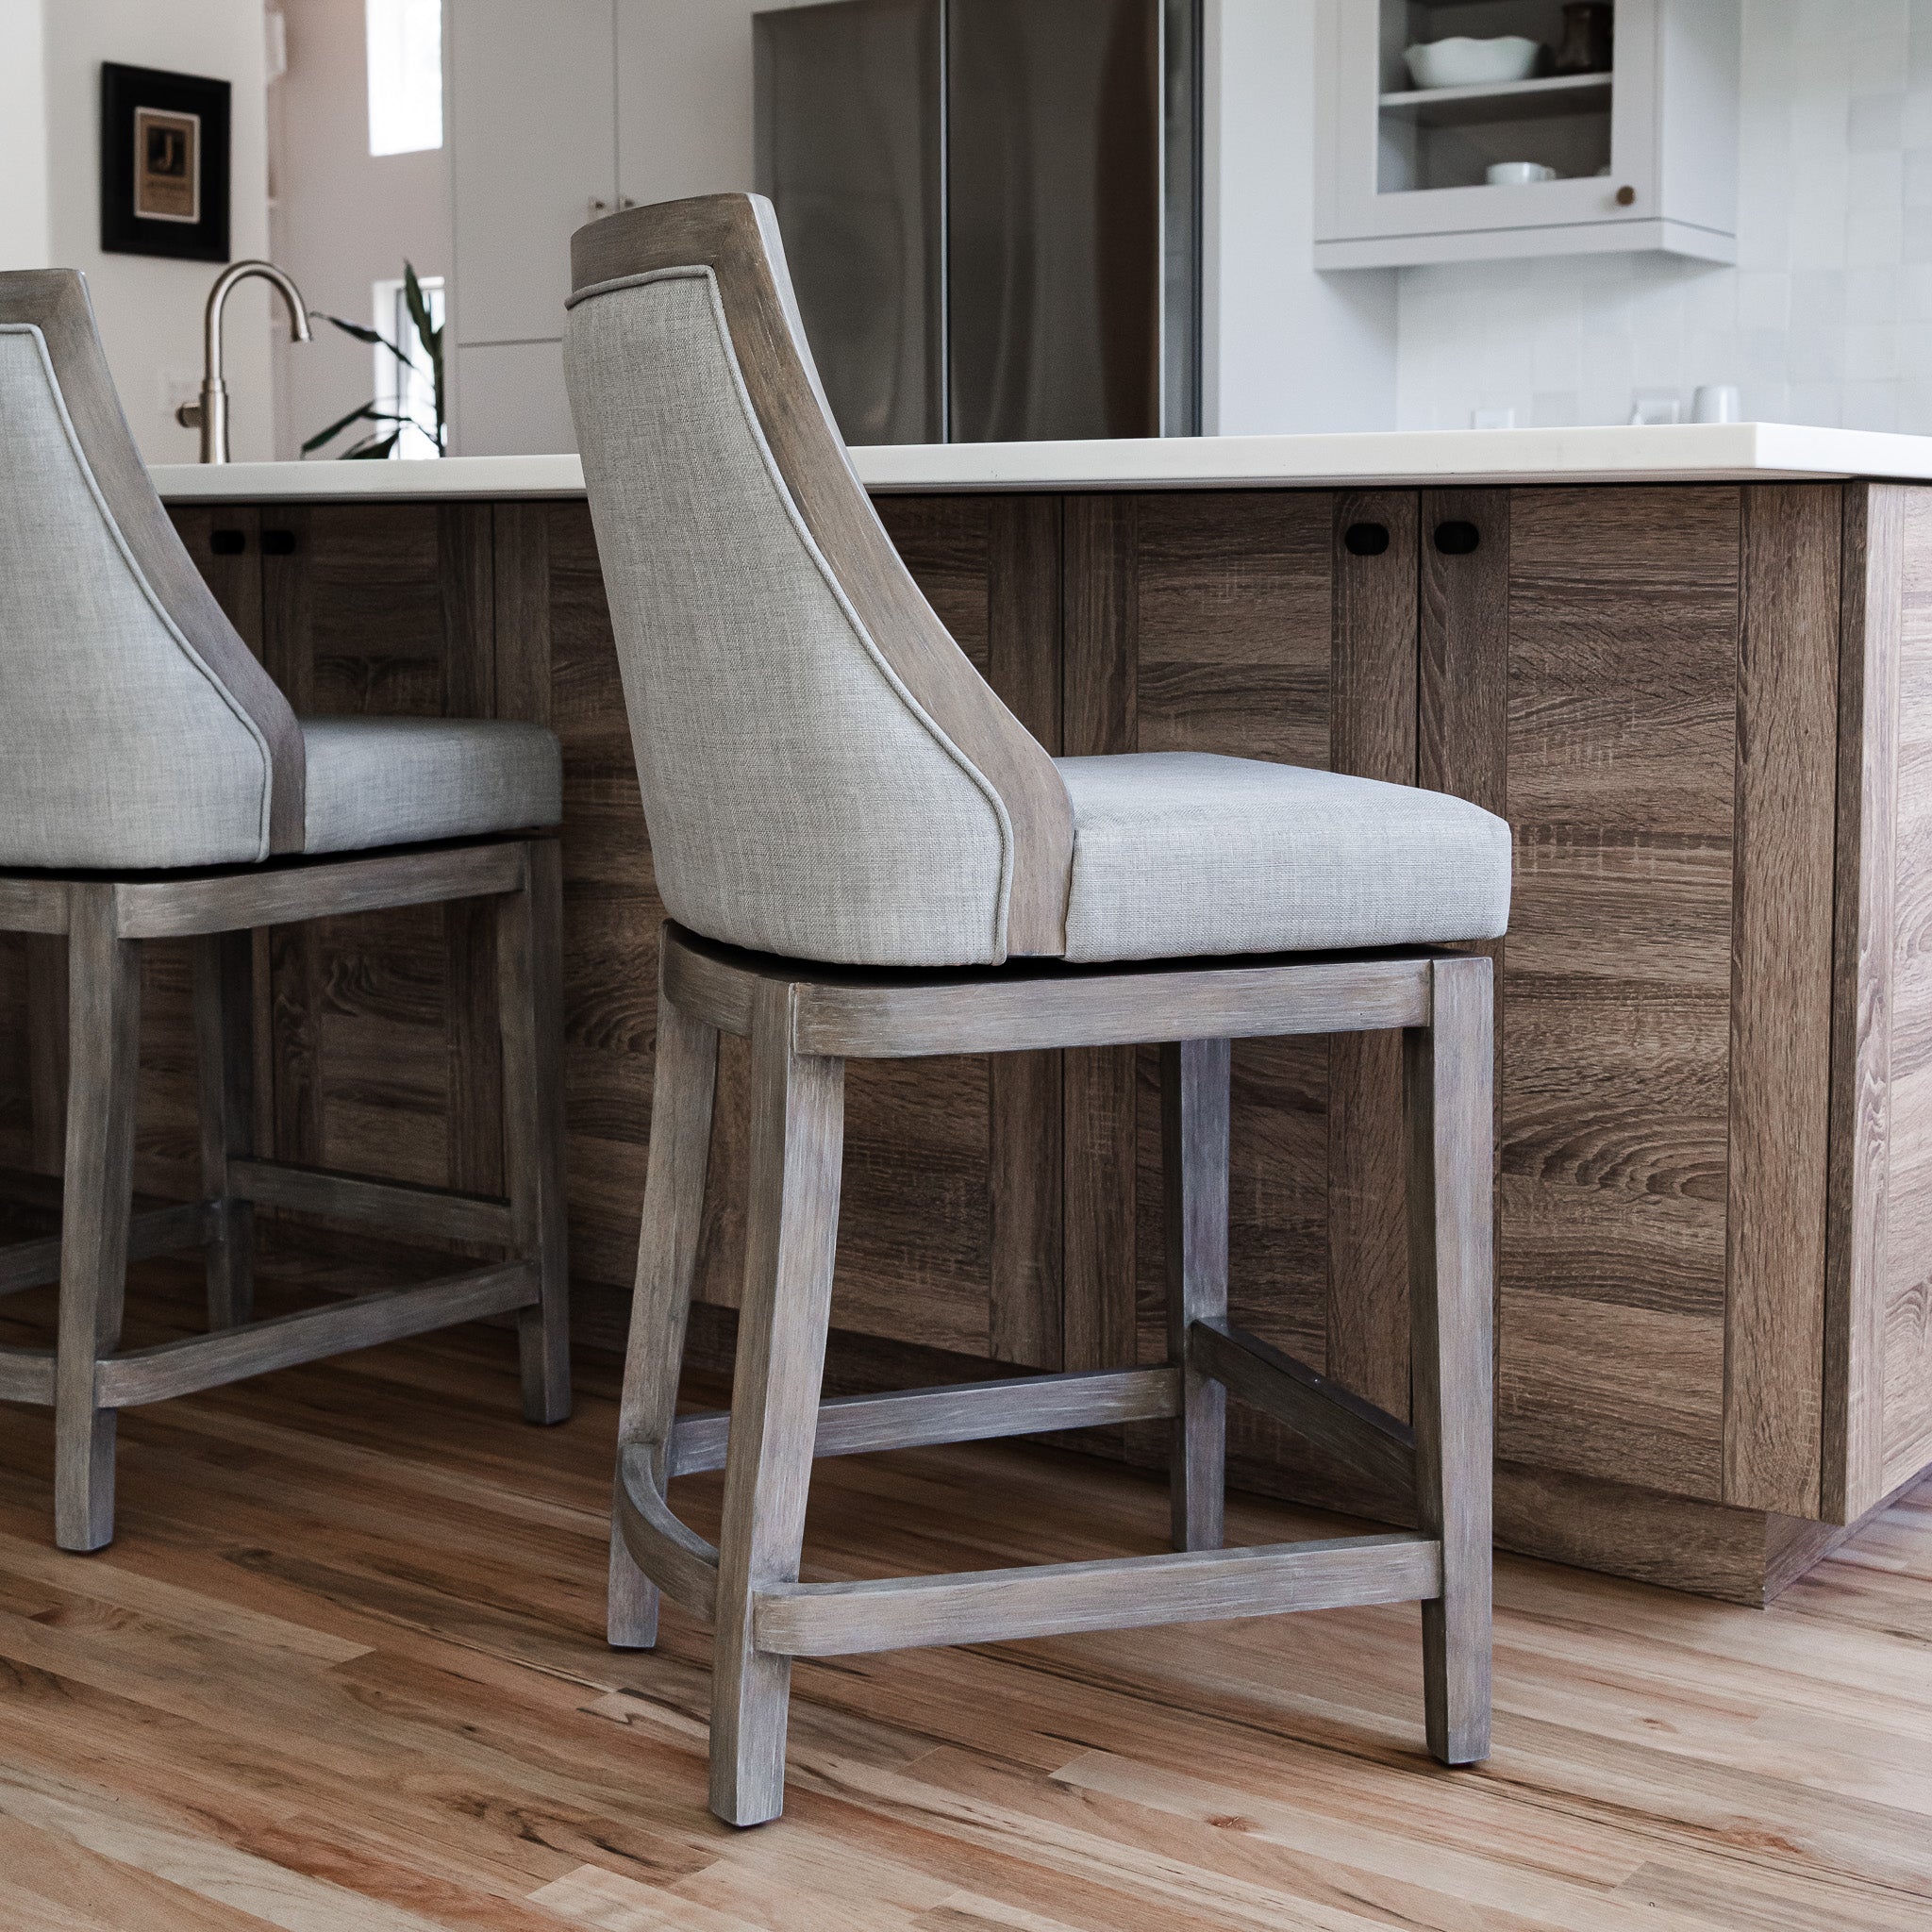 Vienna Bar Stool in Reclaimed Oak Finish with Ash Grey Fabric Upholstery in Stools by Maven Lane